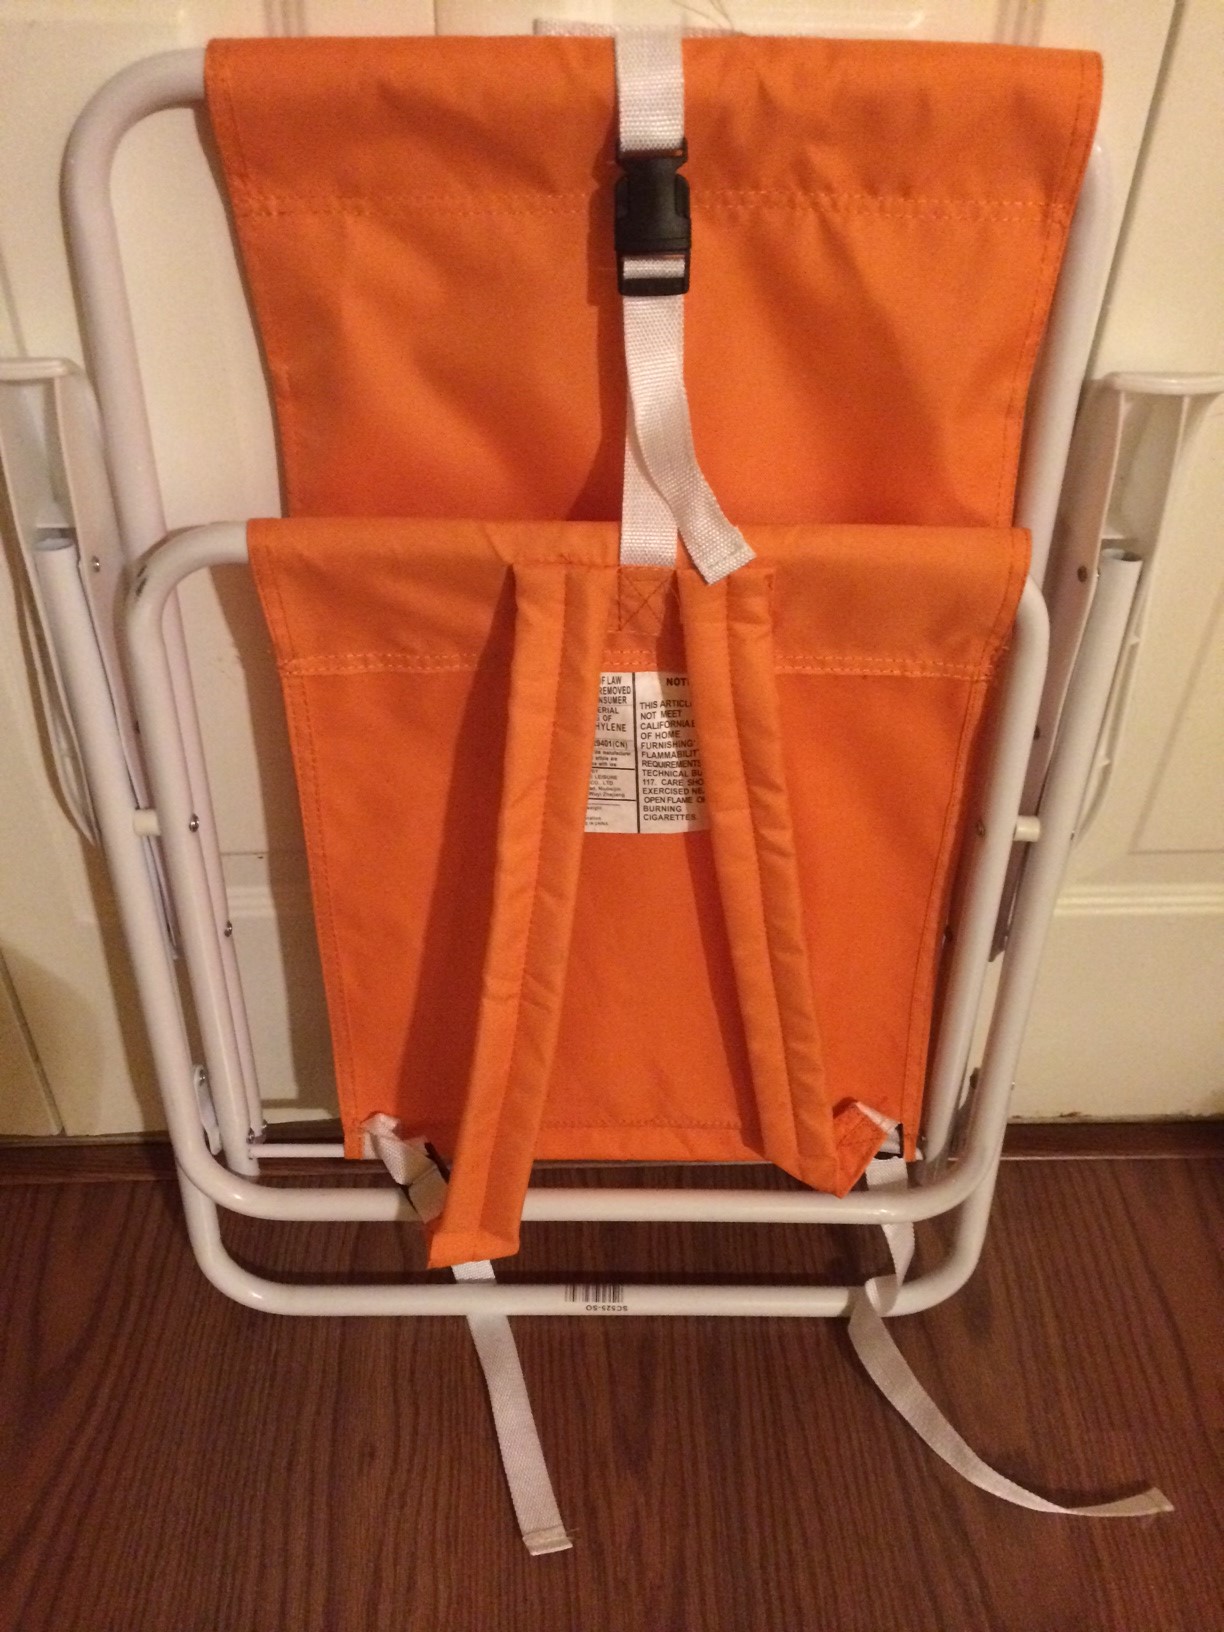 Orange and white beach chair that can be worn like a backpack.